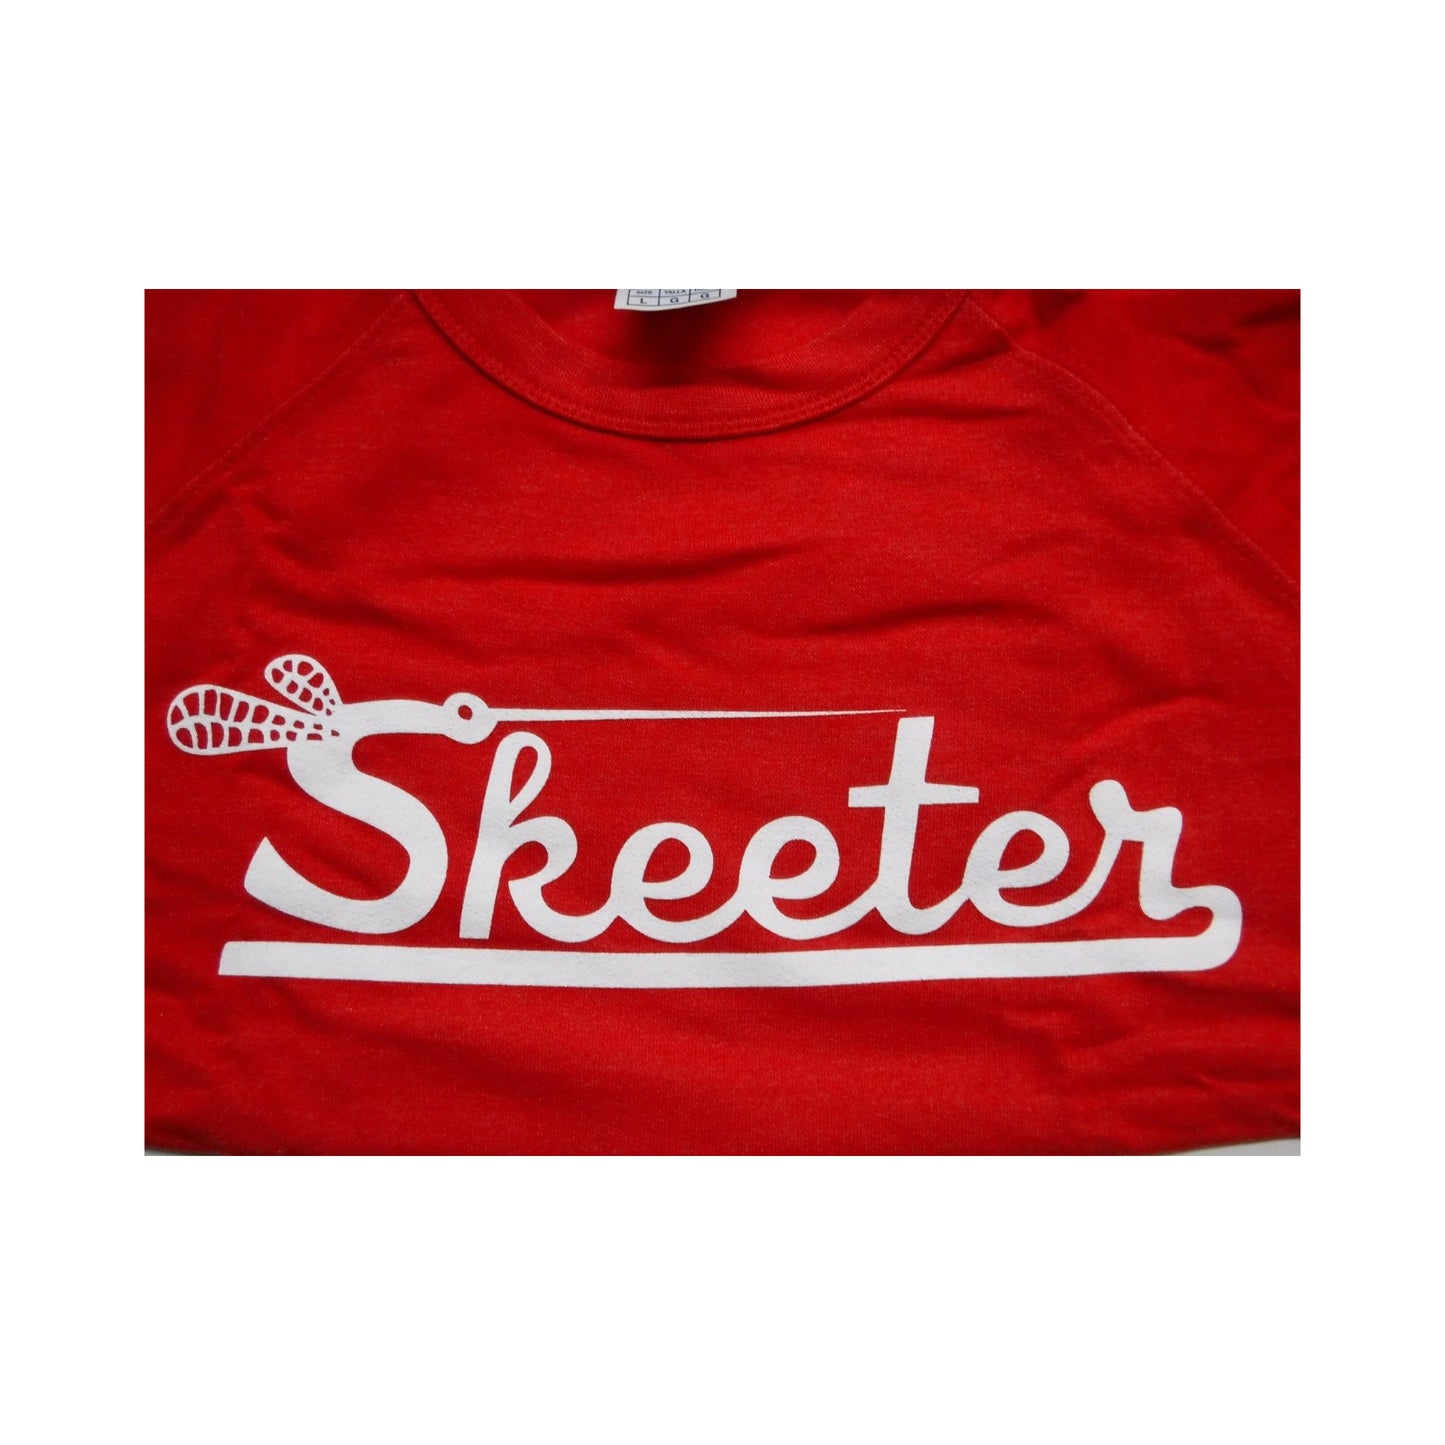 New Authentic Skeeter Long Sleeve Classic Crew Pullover Red